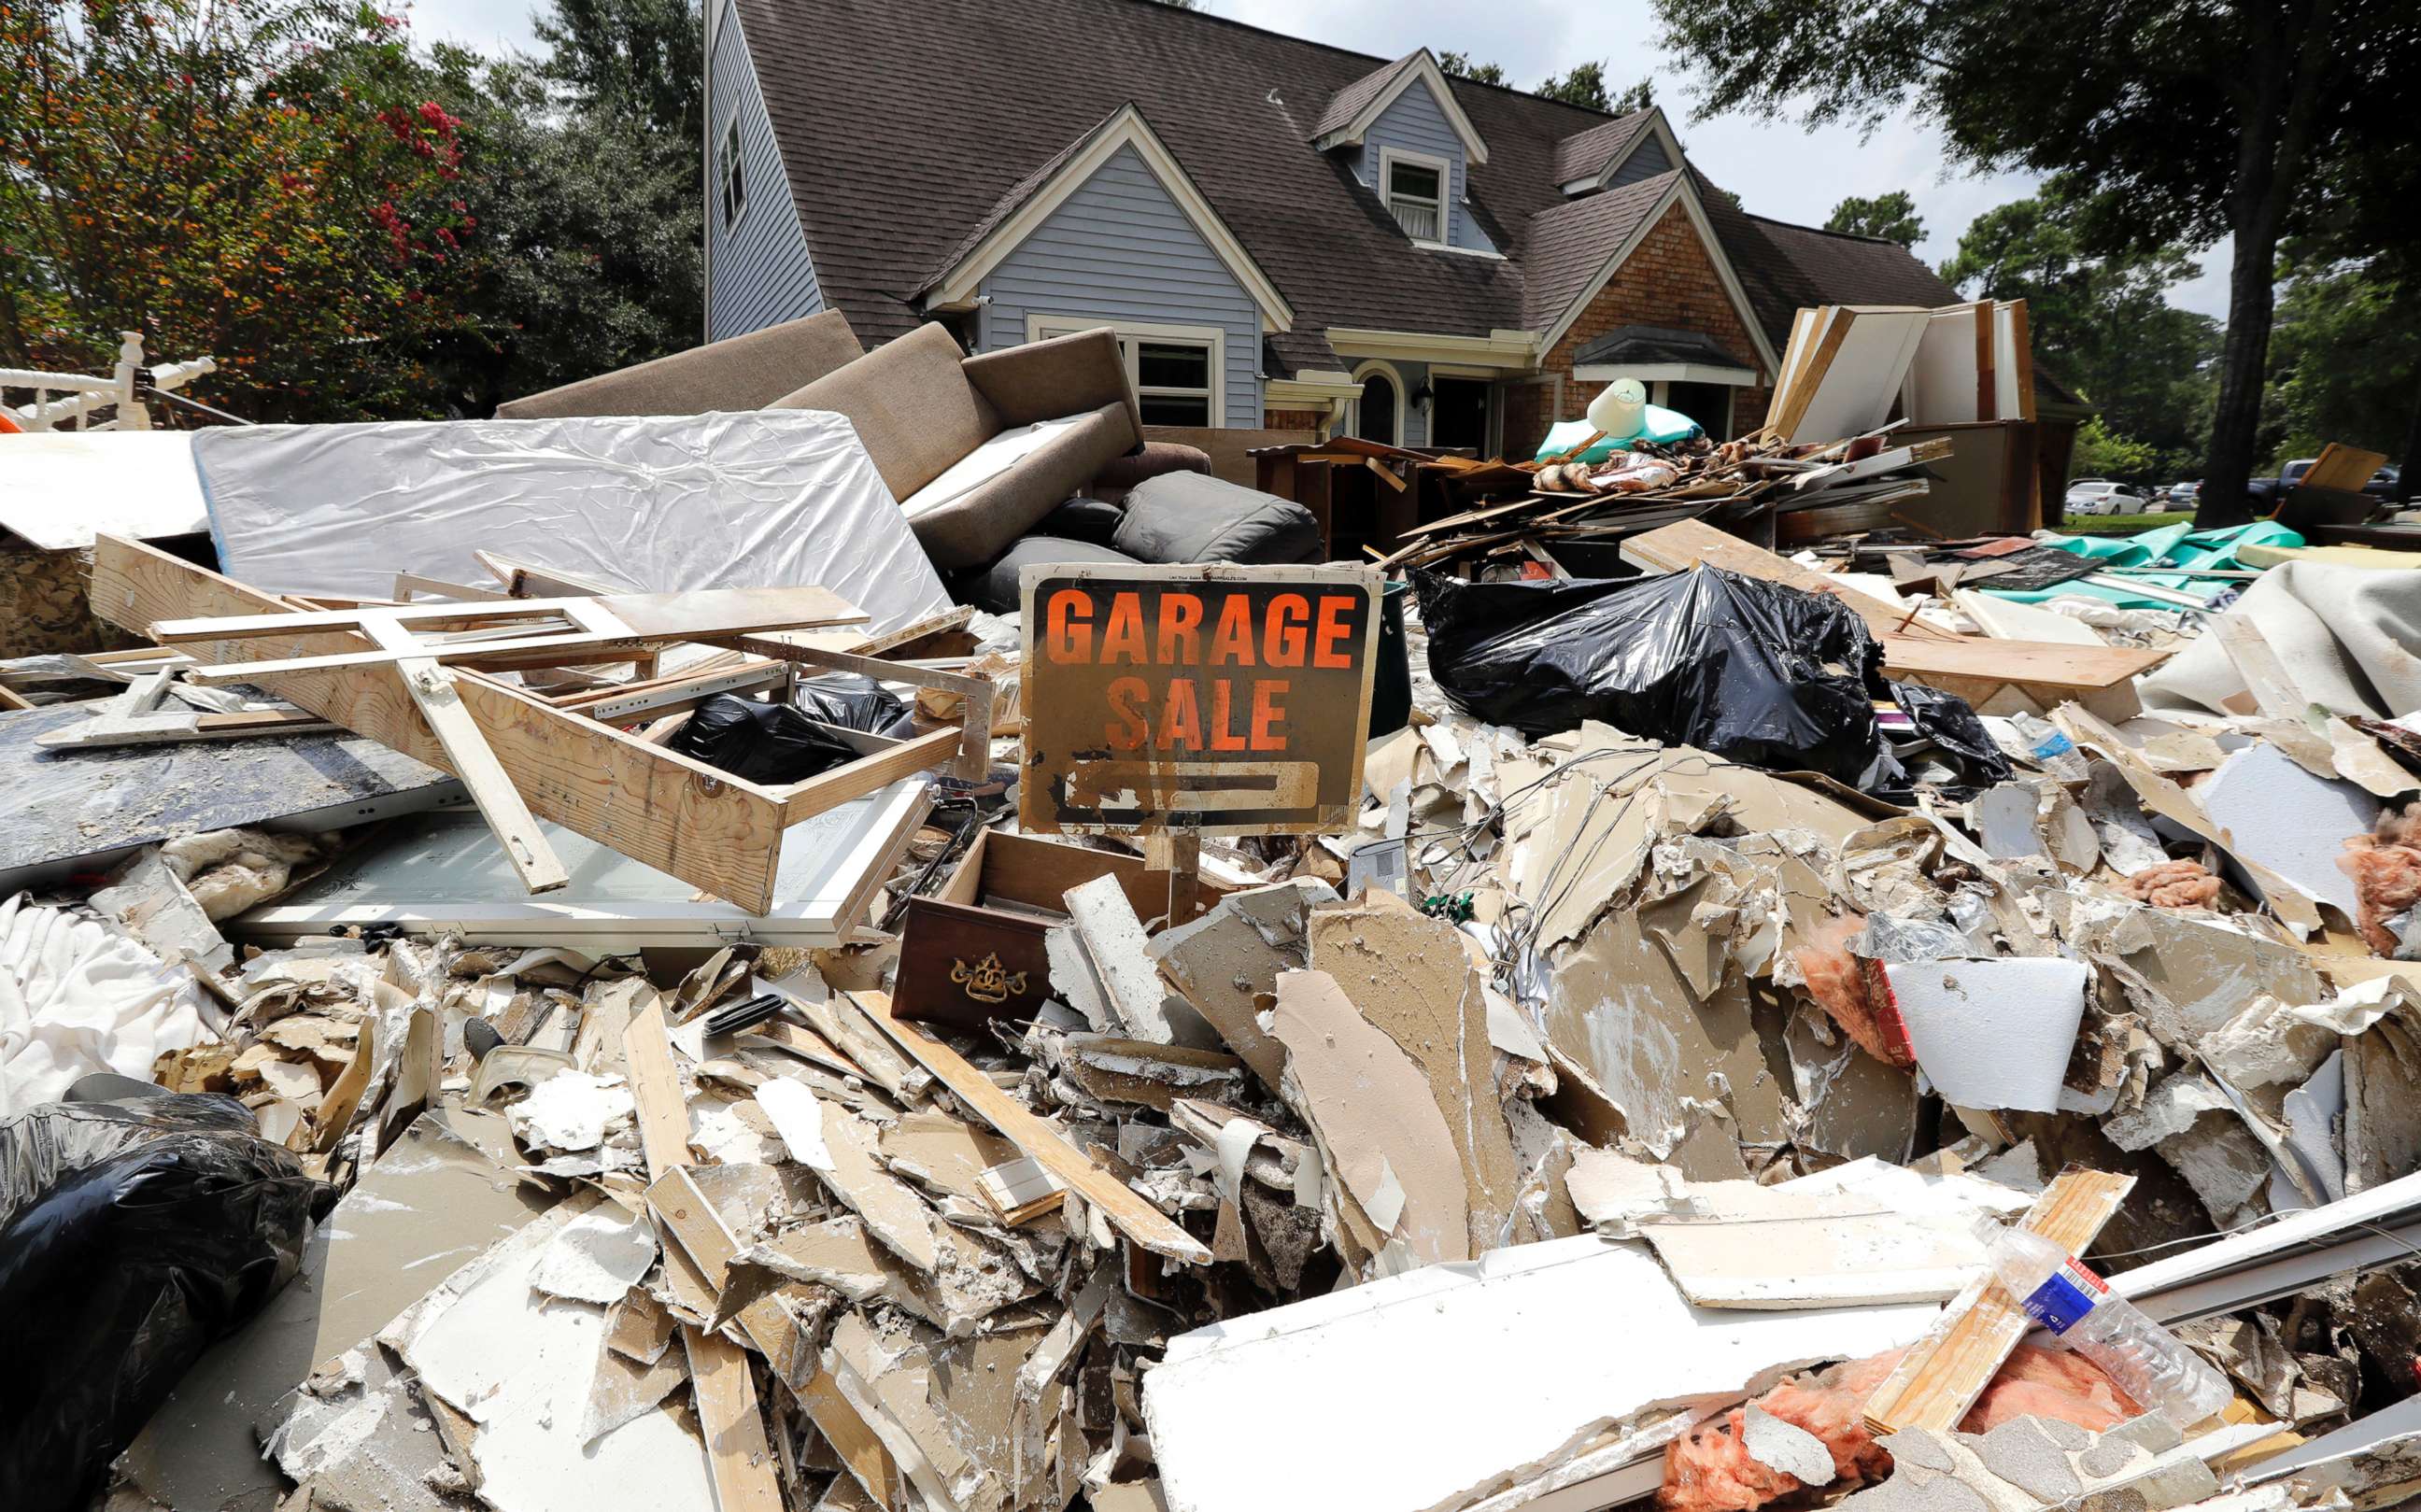 PHOTO: A garage sale sign stands in a pile of debris damaged by floodwaters in the aftermath of Hurricane Harvey in Spring, Texas, Sept. 3, 2017.